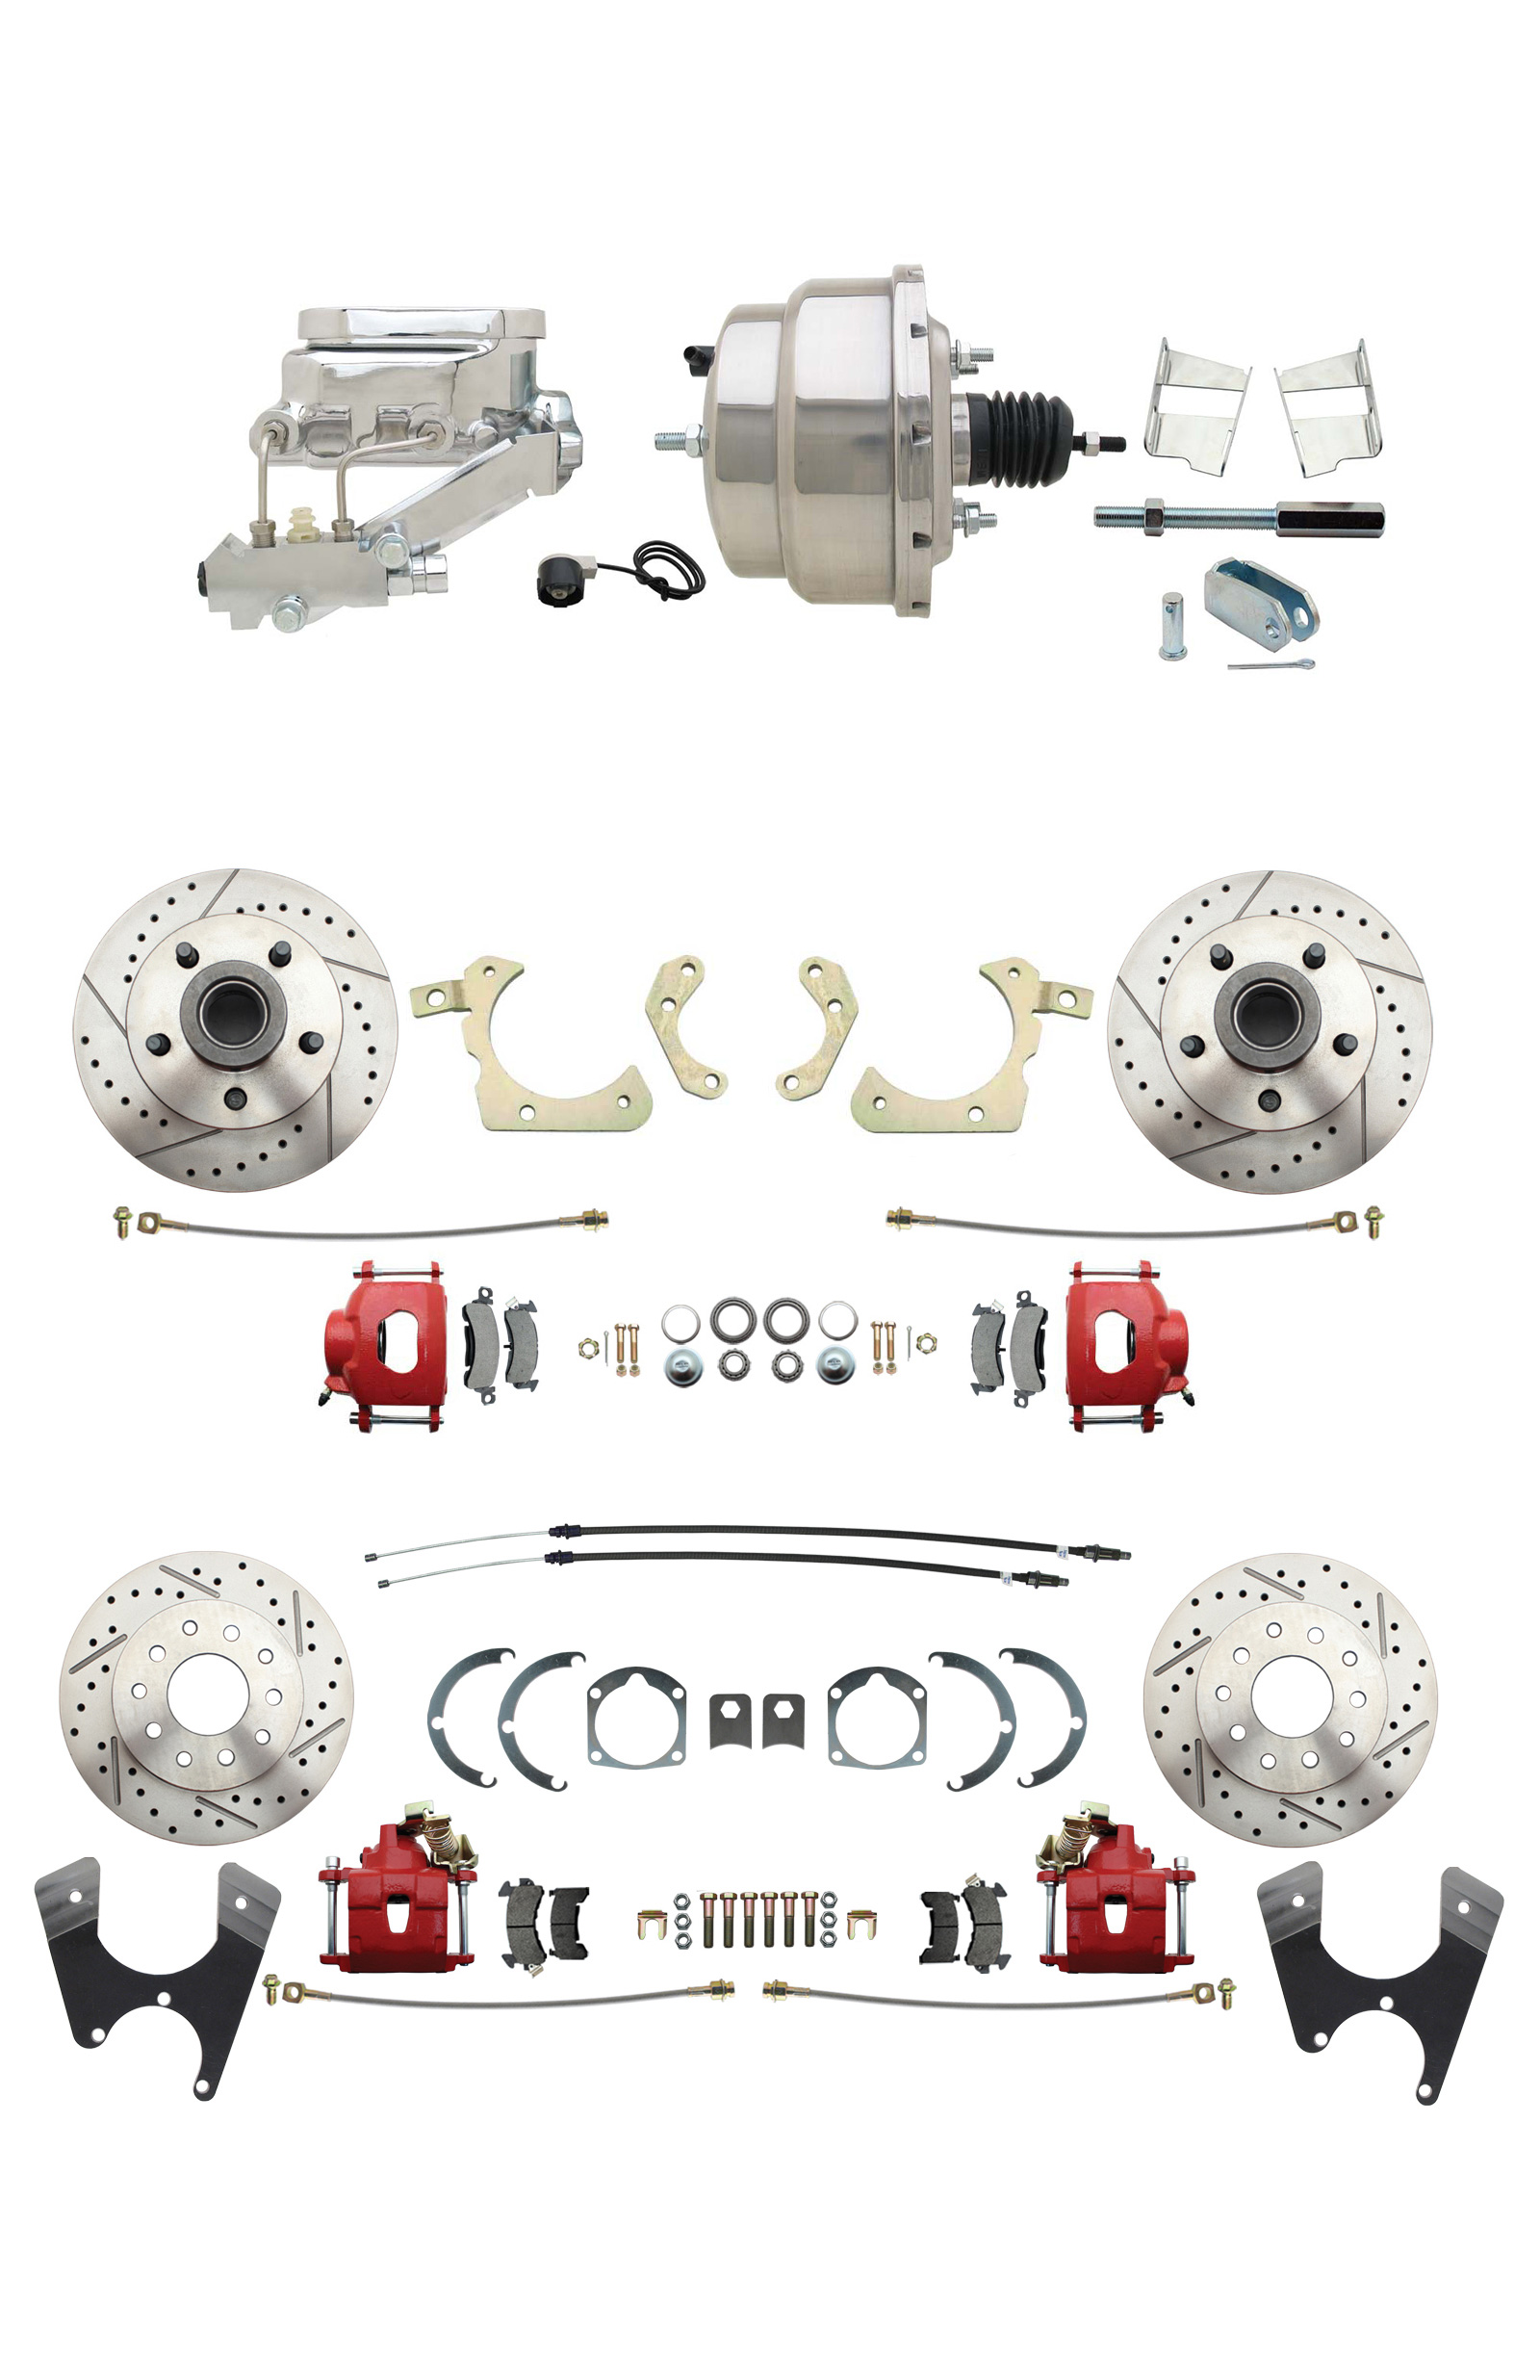 1959-1964 GM Full Size Front & Rear Power Disc Brake Kit Red Powder Coated Calipers Drilled/Slotted Rotors (Impala, Bel Air, Biscayne) & 8 Dual Chrome Booster Conversion Kit W/ Flat Top Chrome Master Cylinder Left Mount